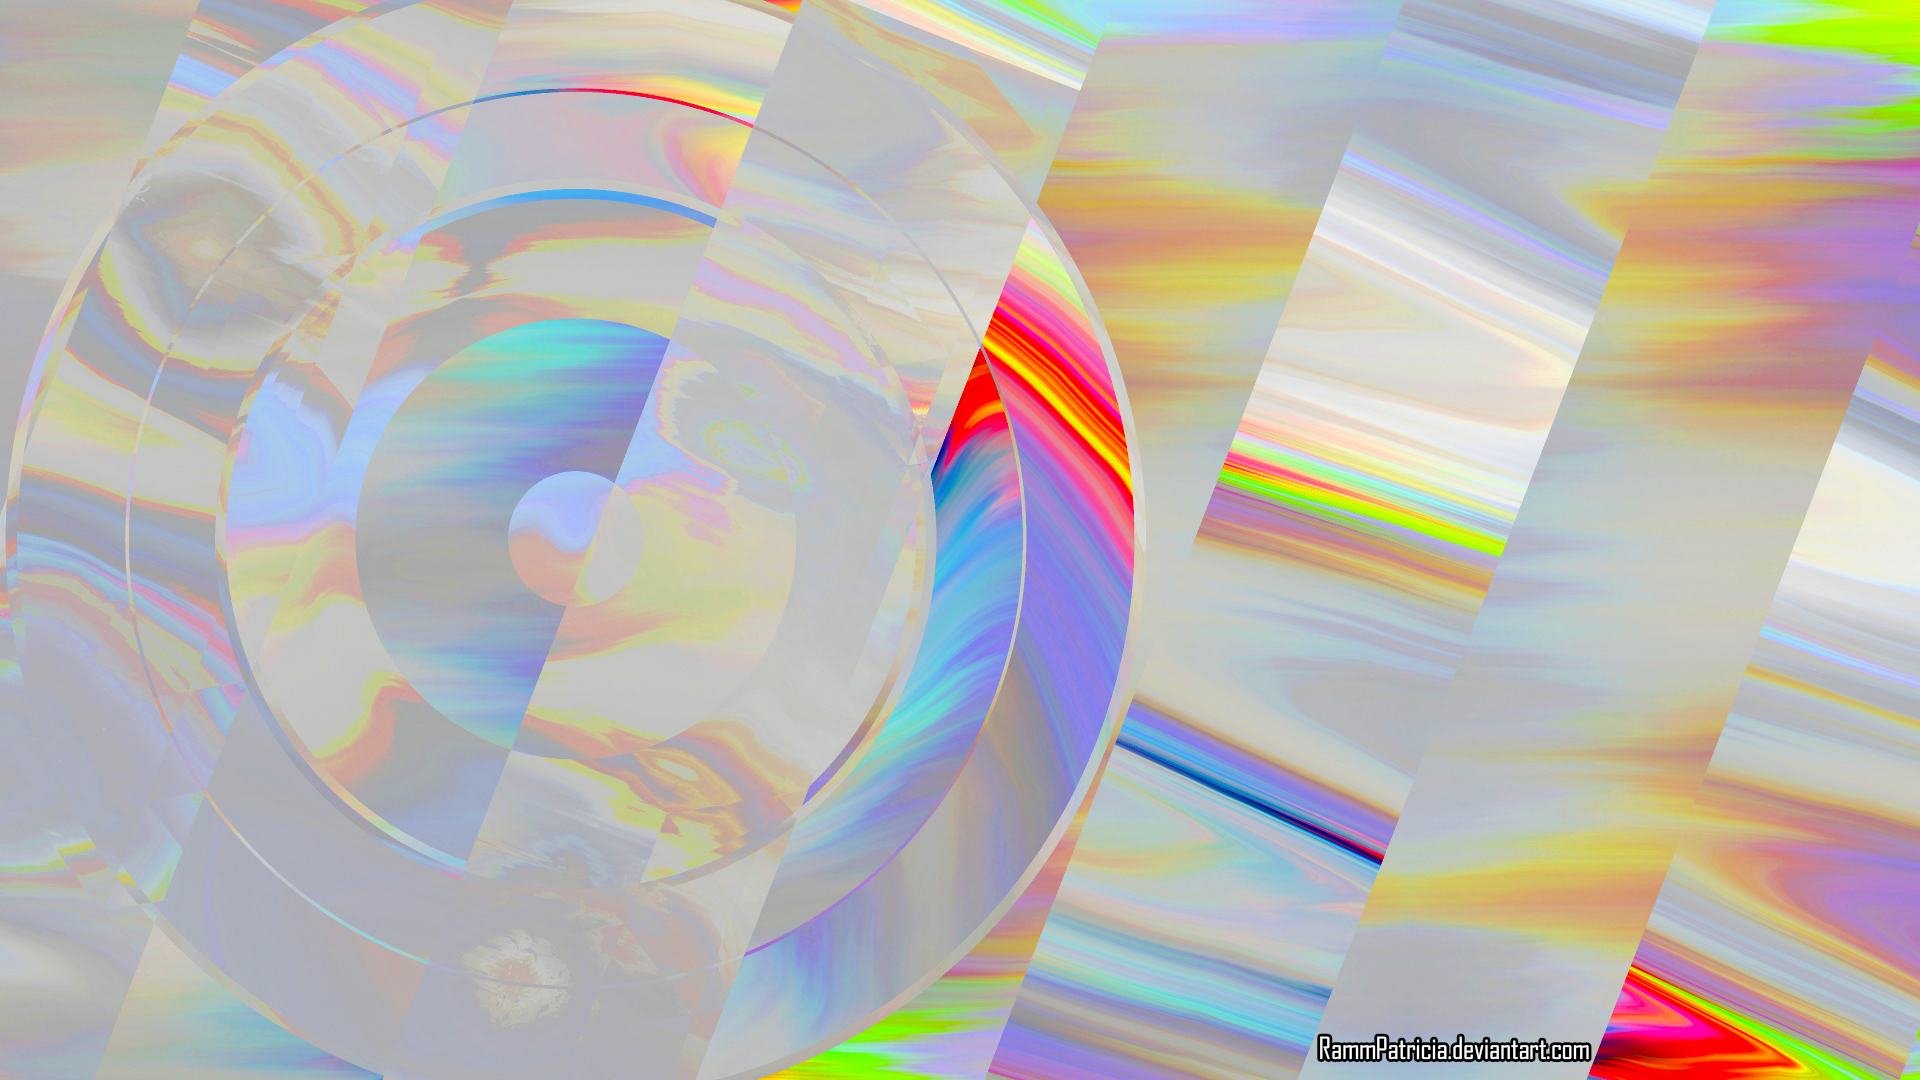 RammPatricia Digital Abstract Colorful Digital Art Watermarked Iridescent 1920x1080